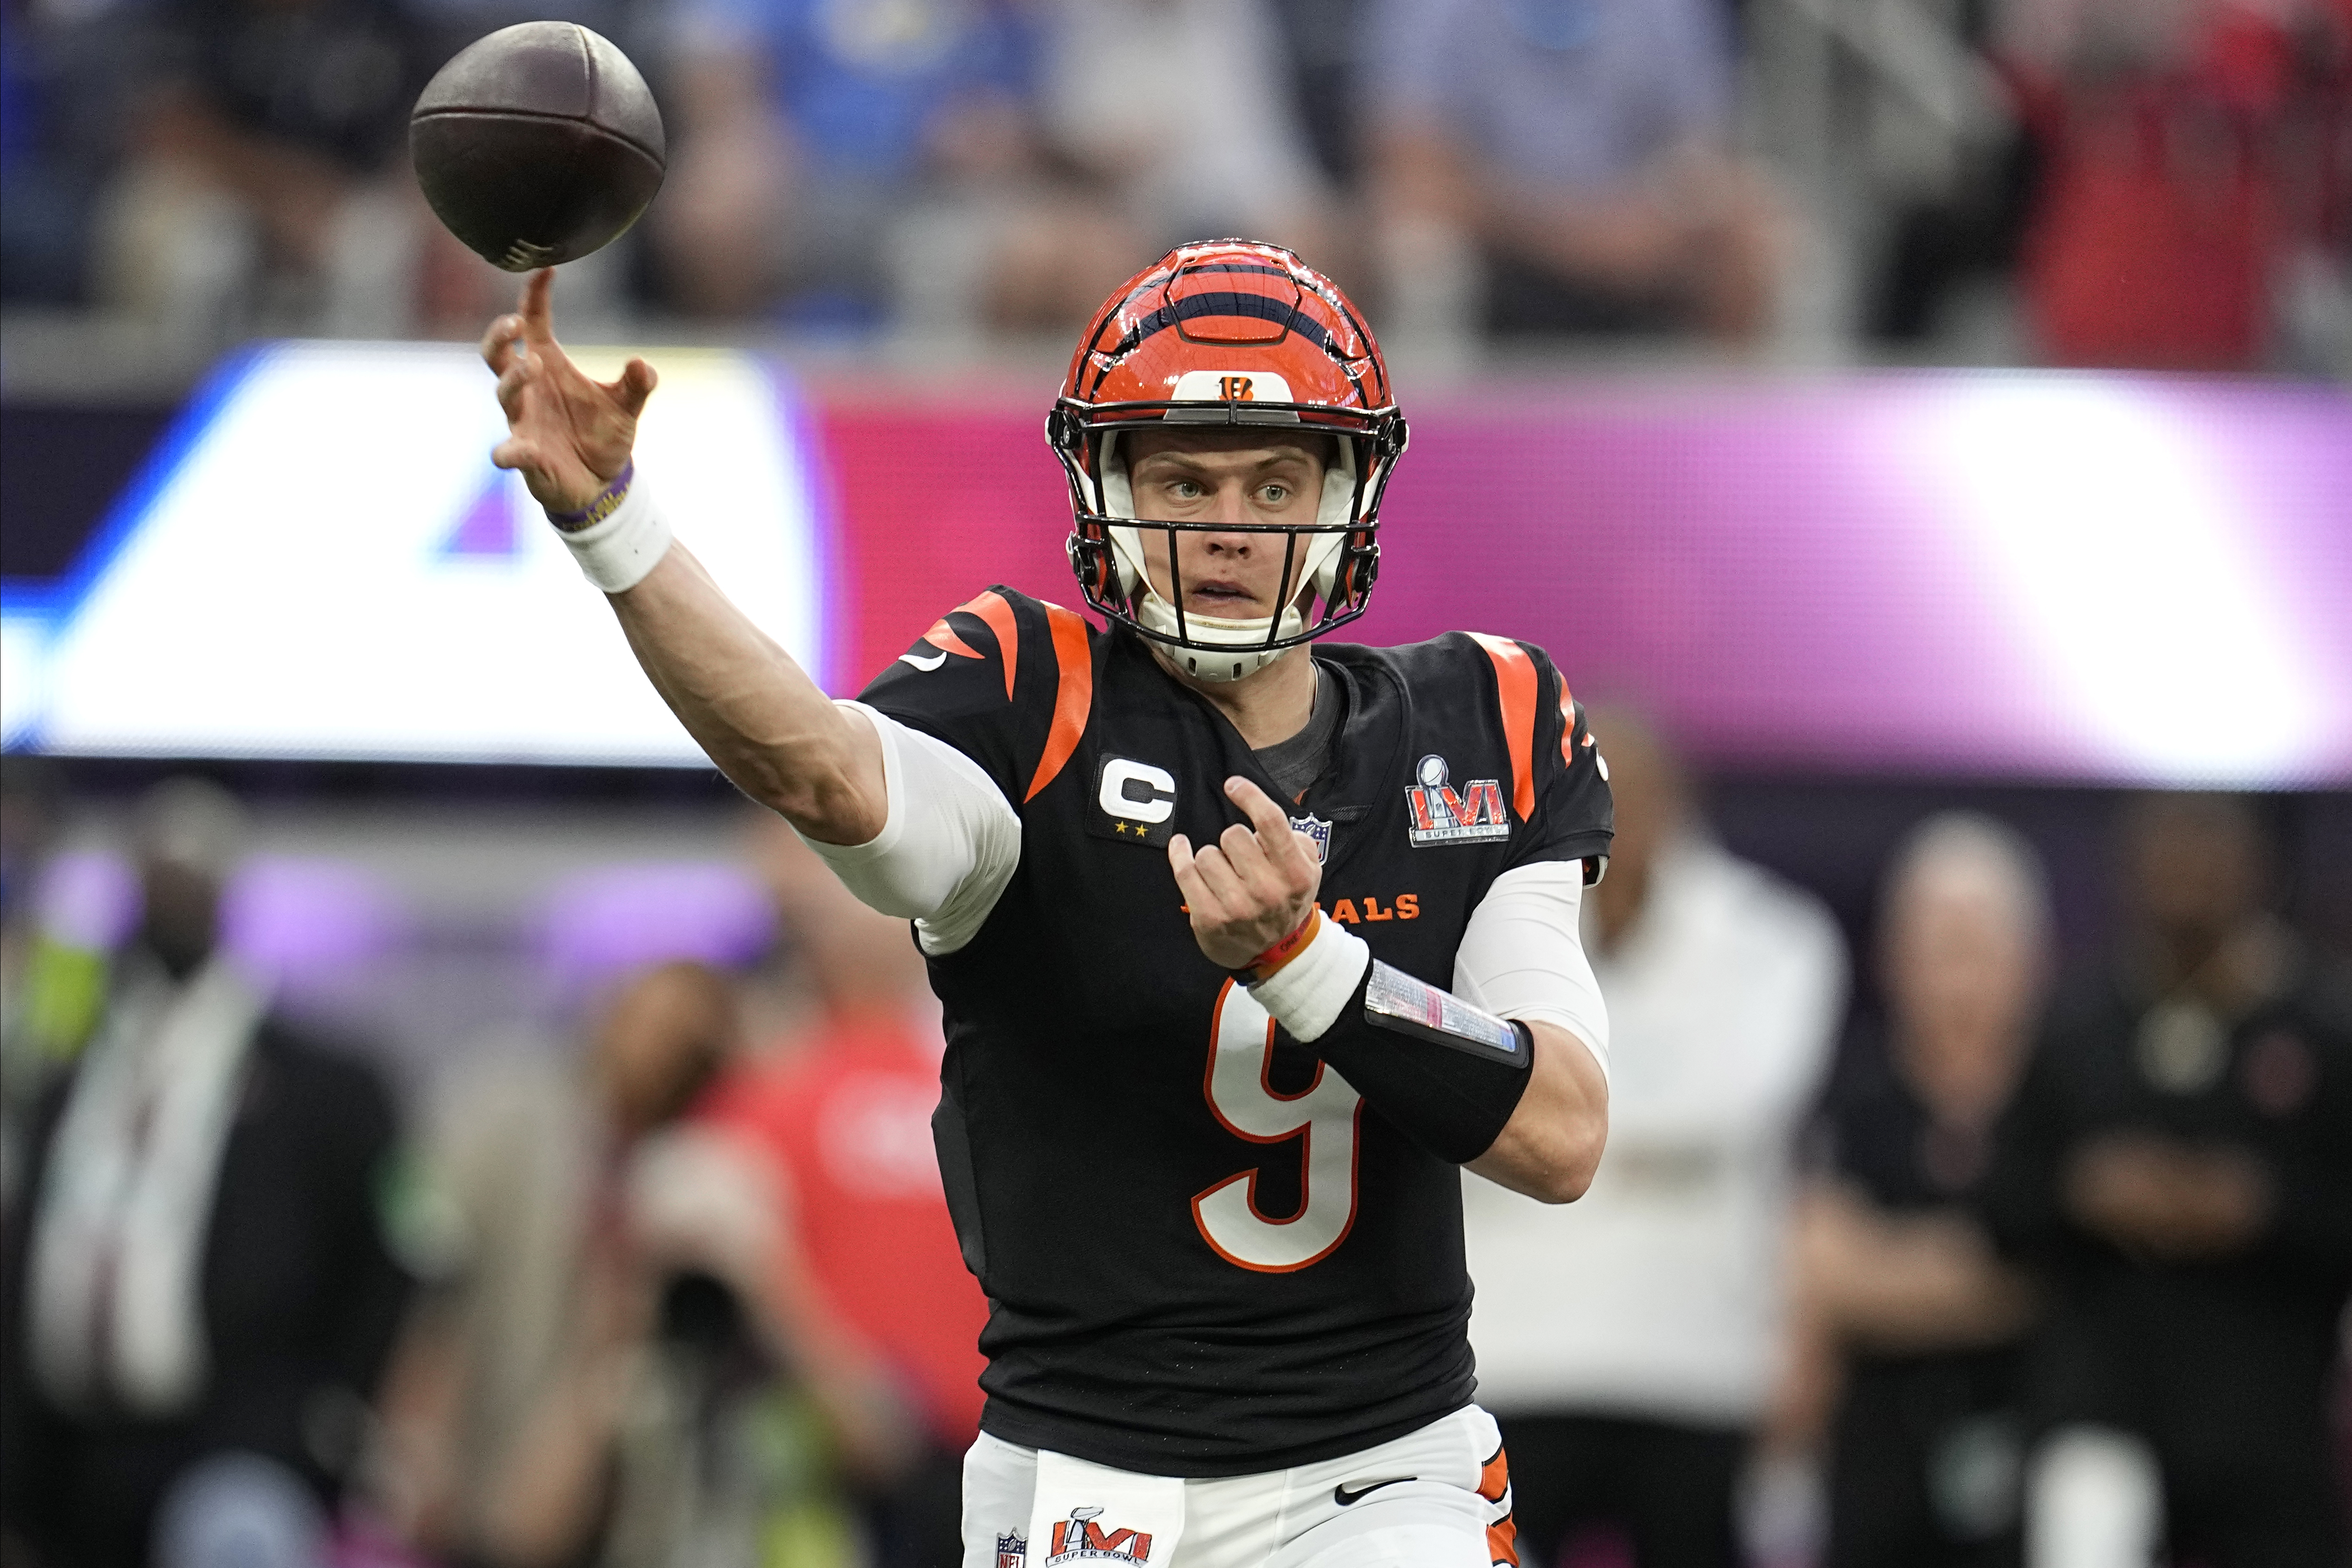 NFL Rules Quirk Means Bengals Are Home Team in Los Angeles Super Bowl